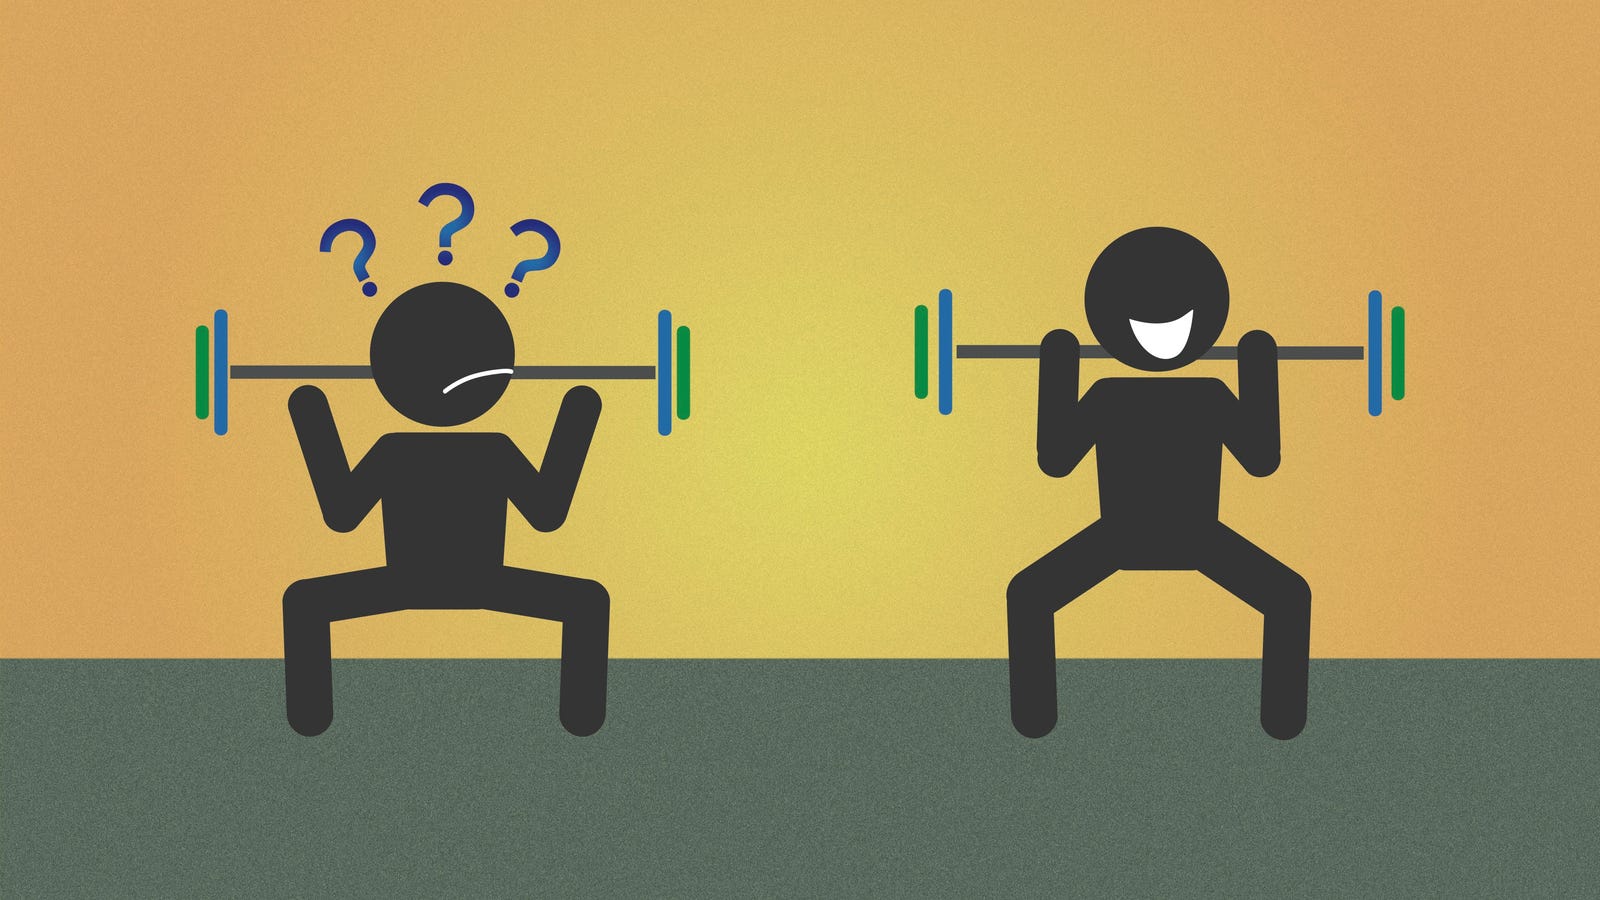 What should I do when lifting weight up against gravity?